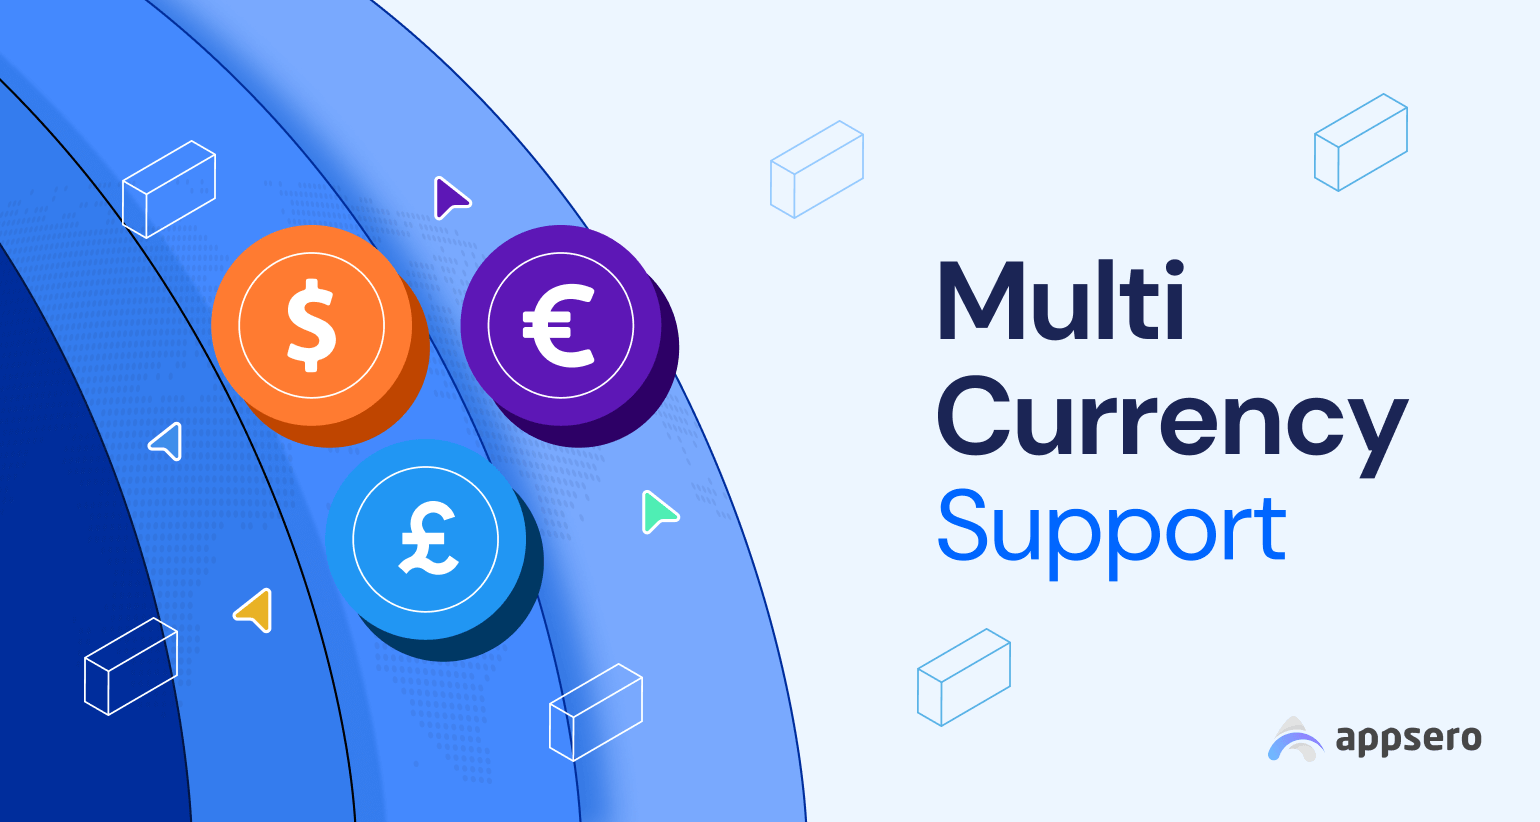 Benefits of Multi-Currency Support